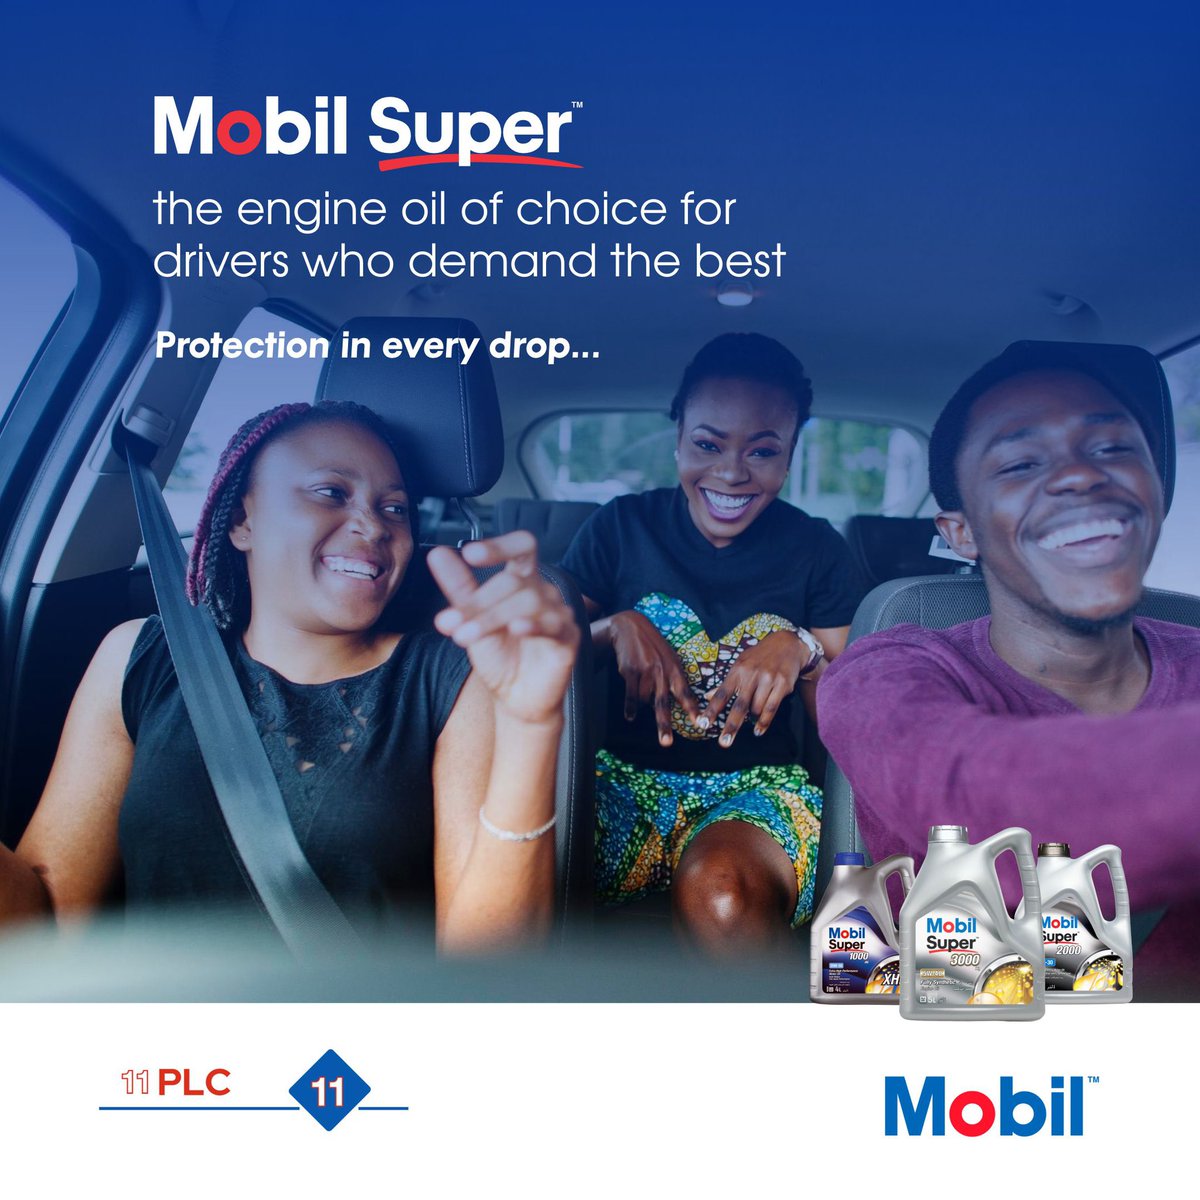 Choose Mobil Super for top-notch engine protection that you can rely on. The ultimate choice for drivers who demand nothing but the best.

#unbeatableperformance #qualityovereverything #performancematters #enginecare #mobillubricants #mobilinnigeria